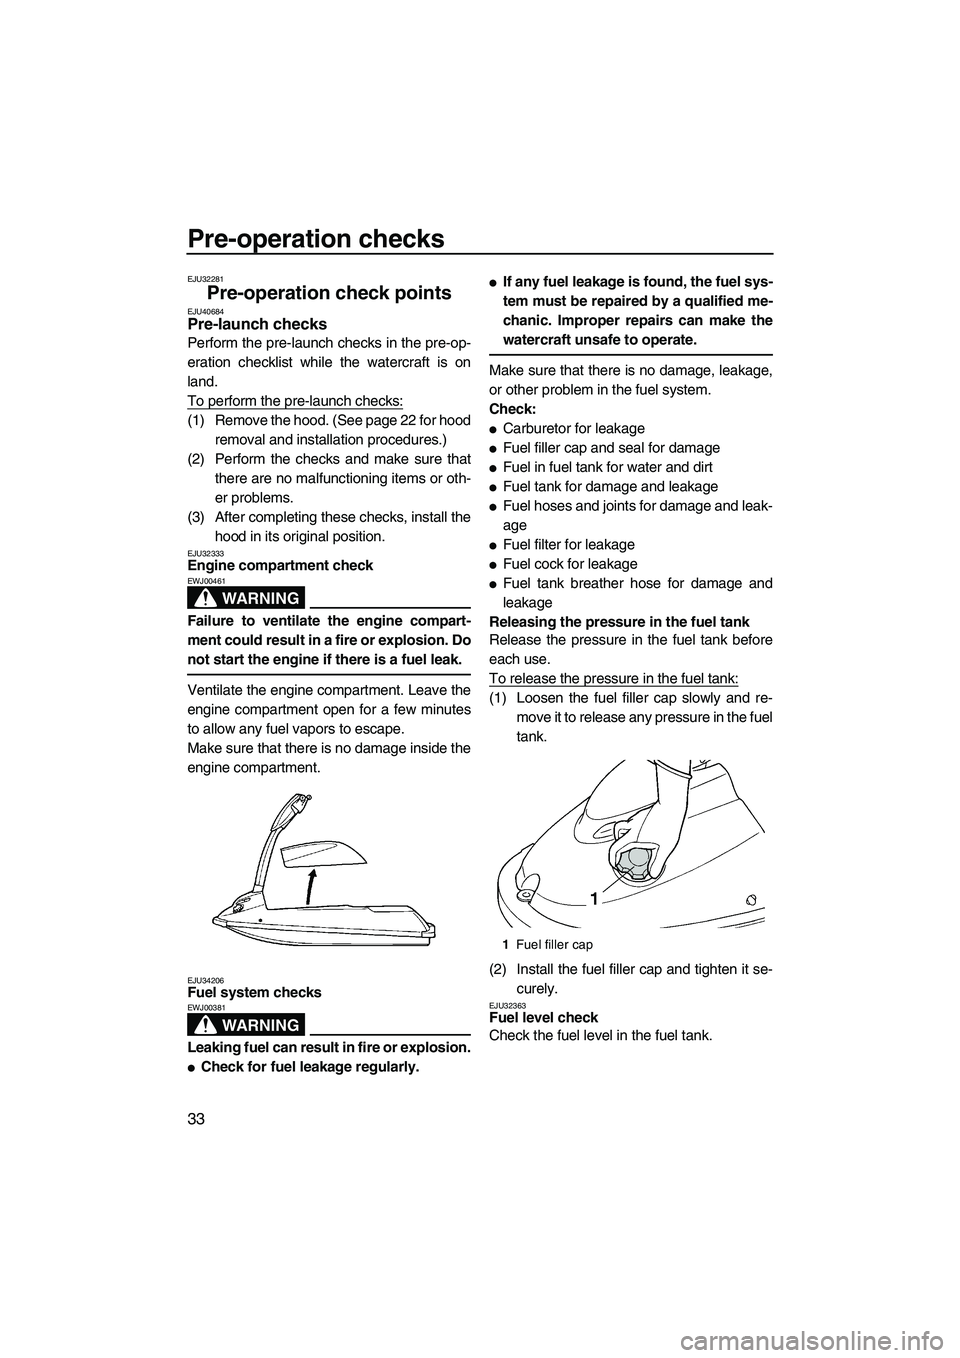 YAMAHA SUPERJET 2010  Owners Manual Pre-operation checks
33
EJU32281
Pre-operation check points EJU40684Pre-launch checks 
Perform the pre-launch checks in the pre-op-
eration checklist while the watercraft is on
land.
To perform the pr